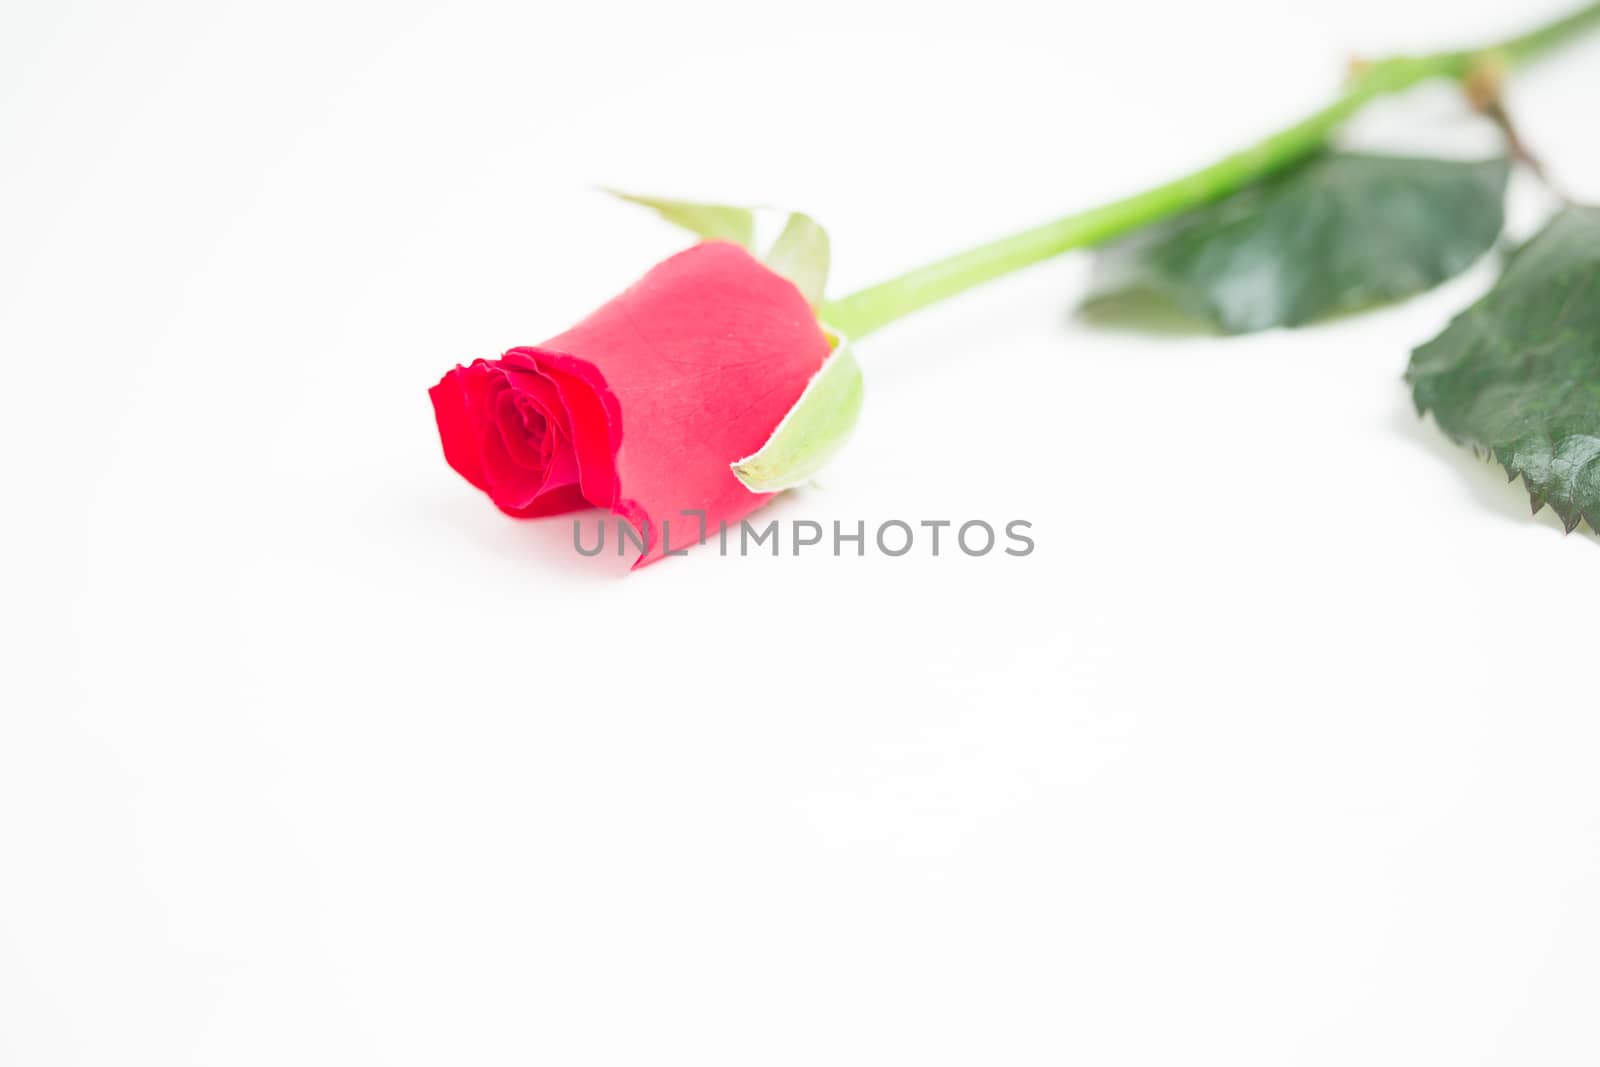 Pink rose with stalk and leaves by Wavebreakmedia